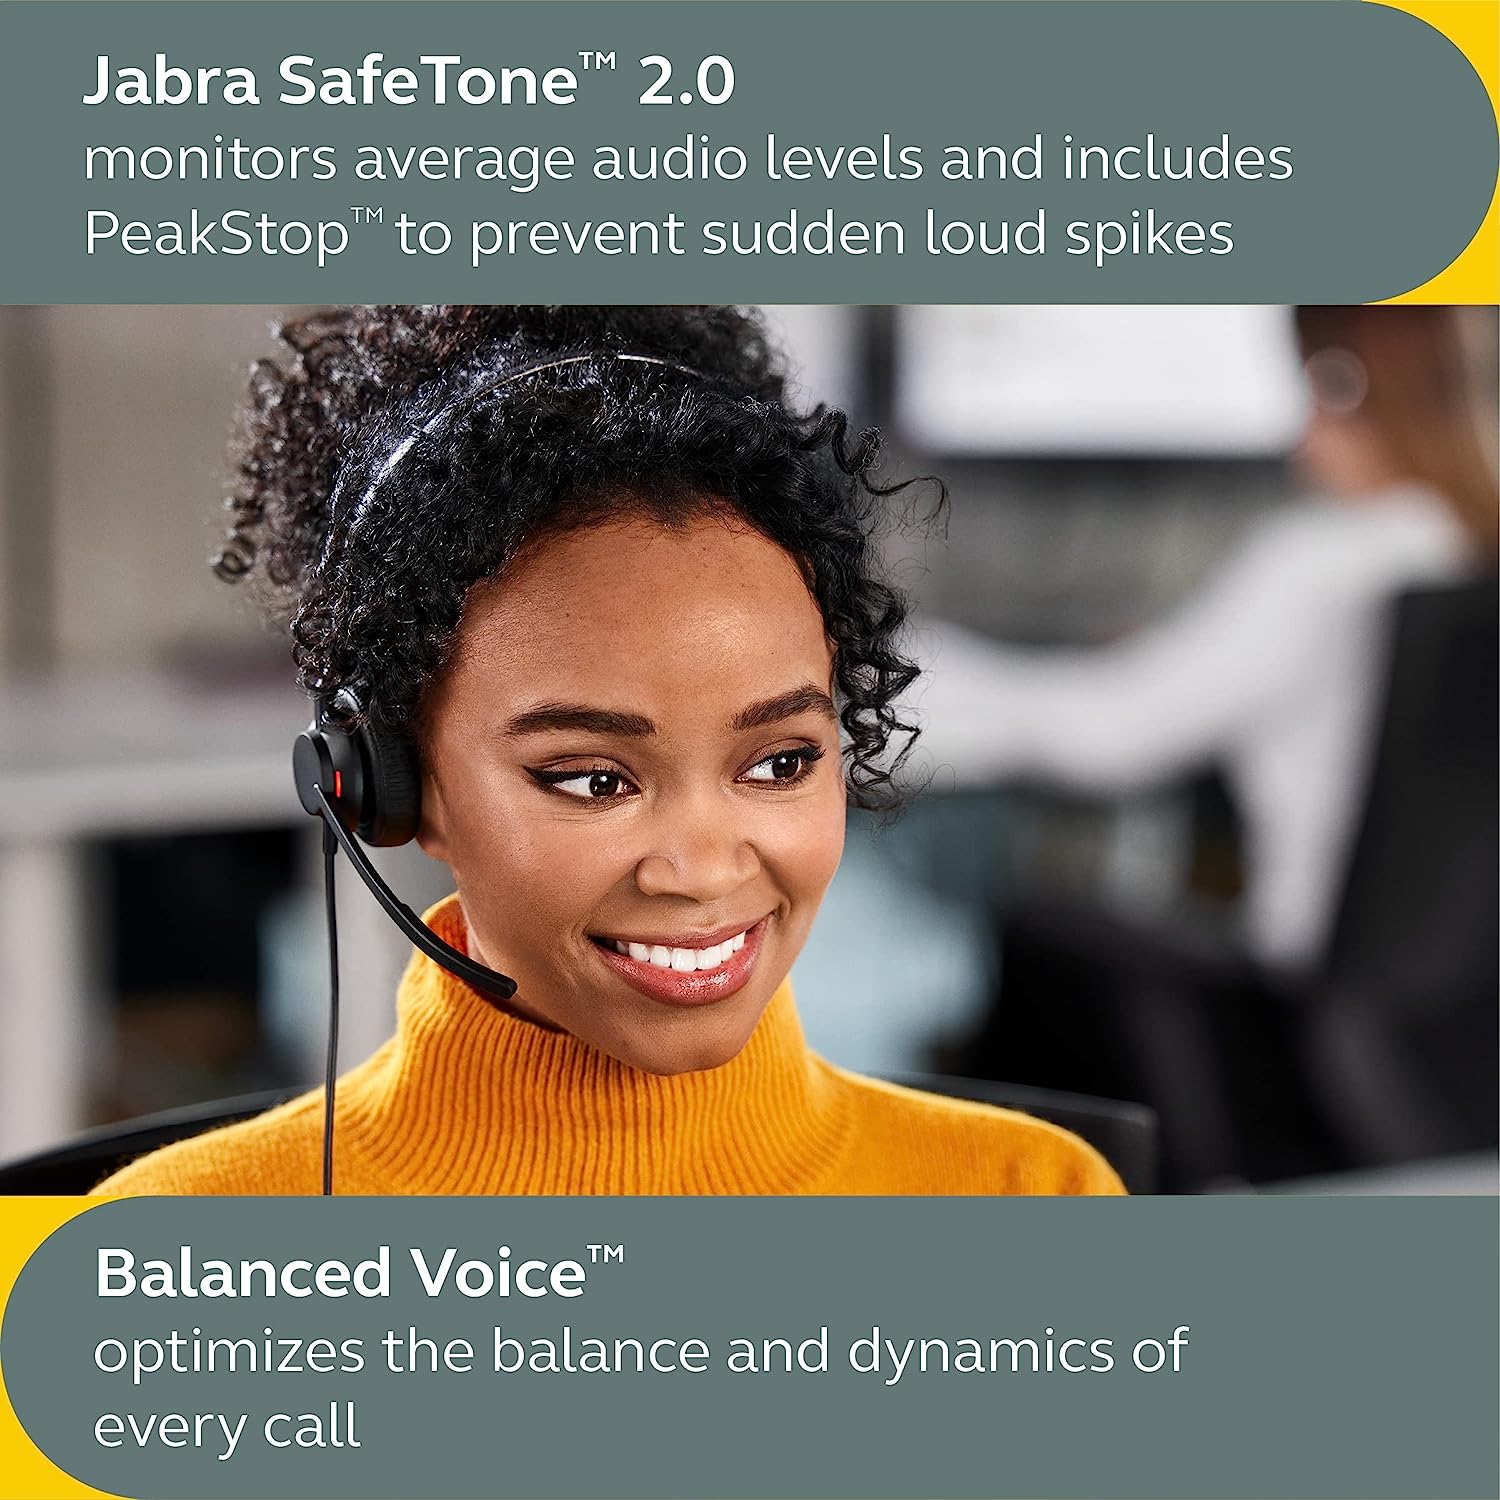 Jabra Engage 50 II Wired Stereo Headset with Link Call Control - Noise-Cancelling 3-Mic Technology, USB-C Cable - Works with All Leading Unified Communications Platforms